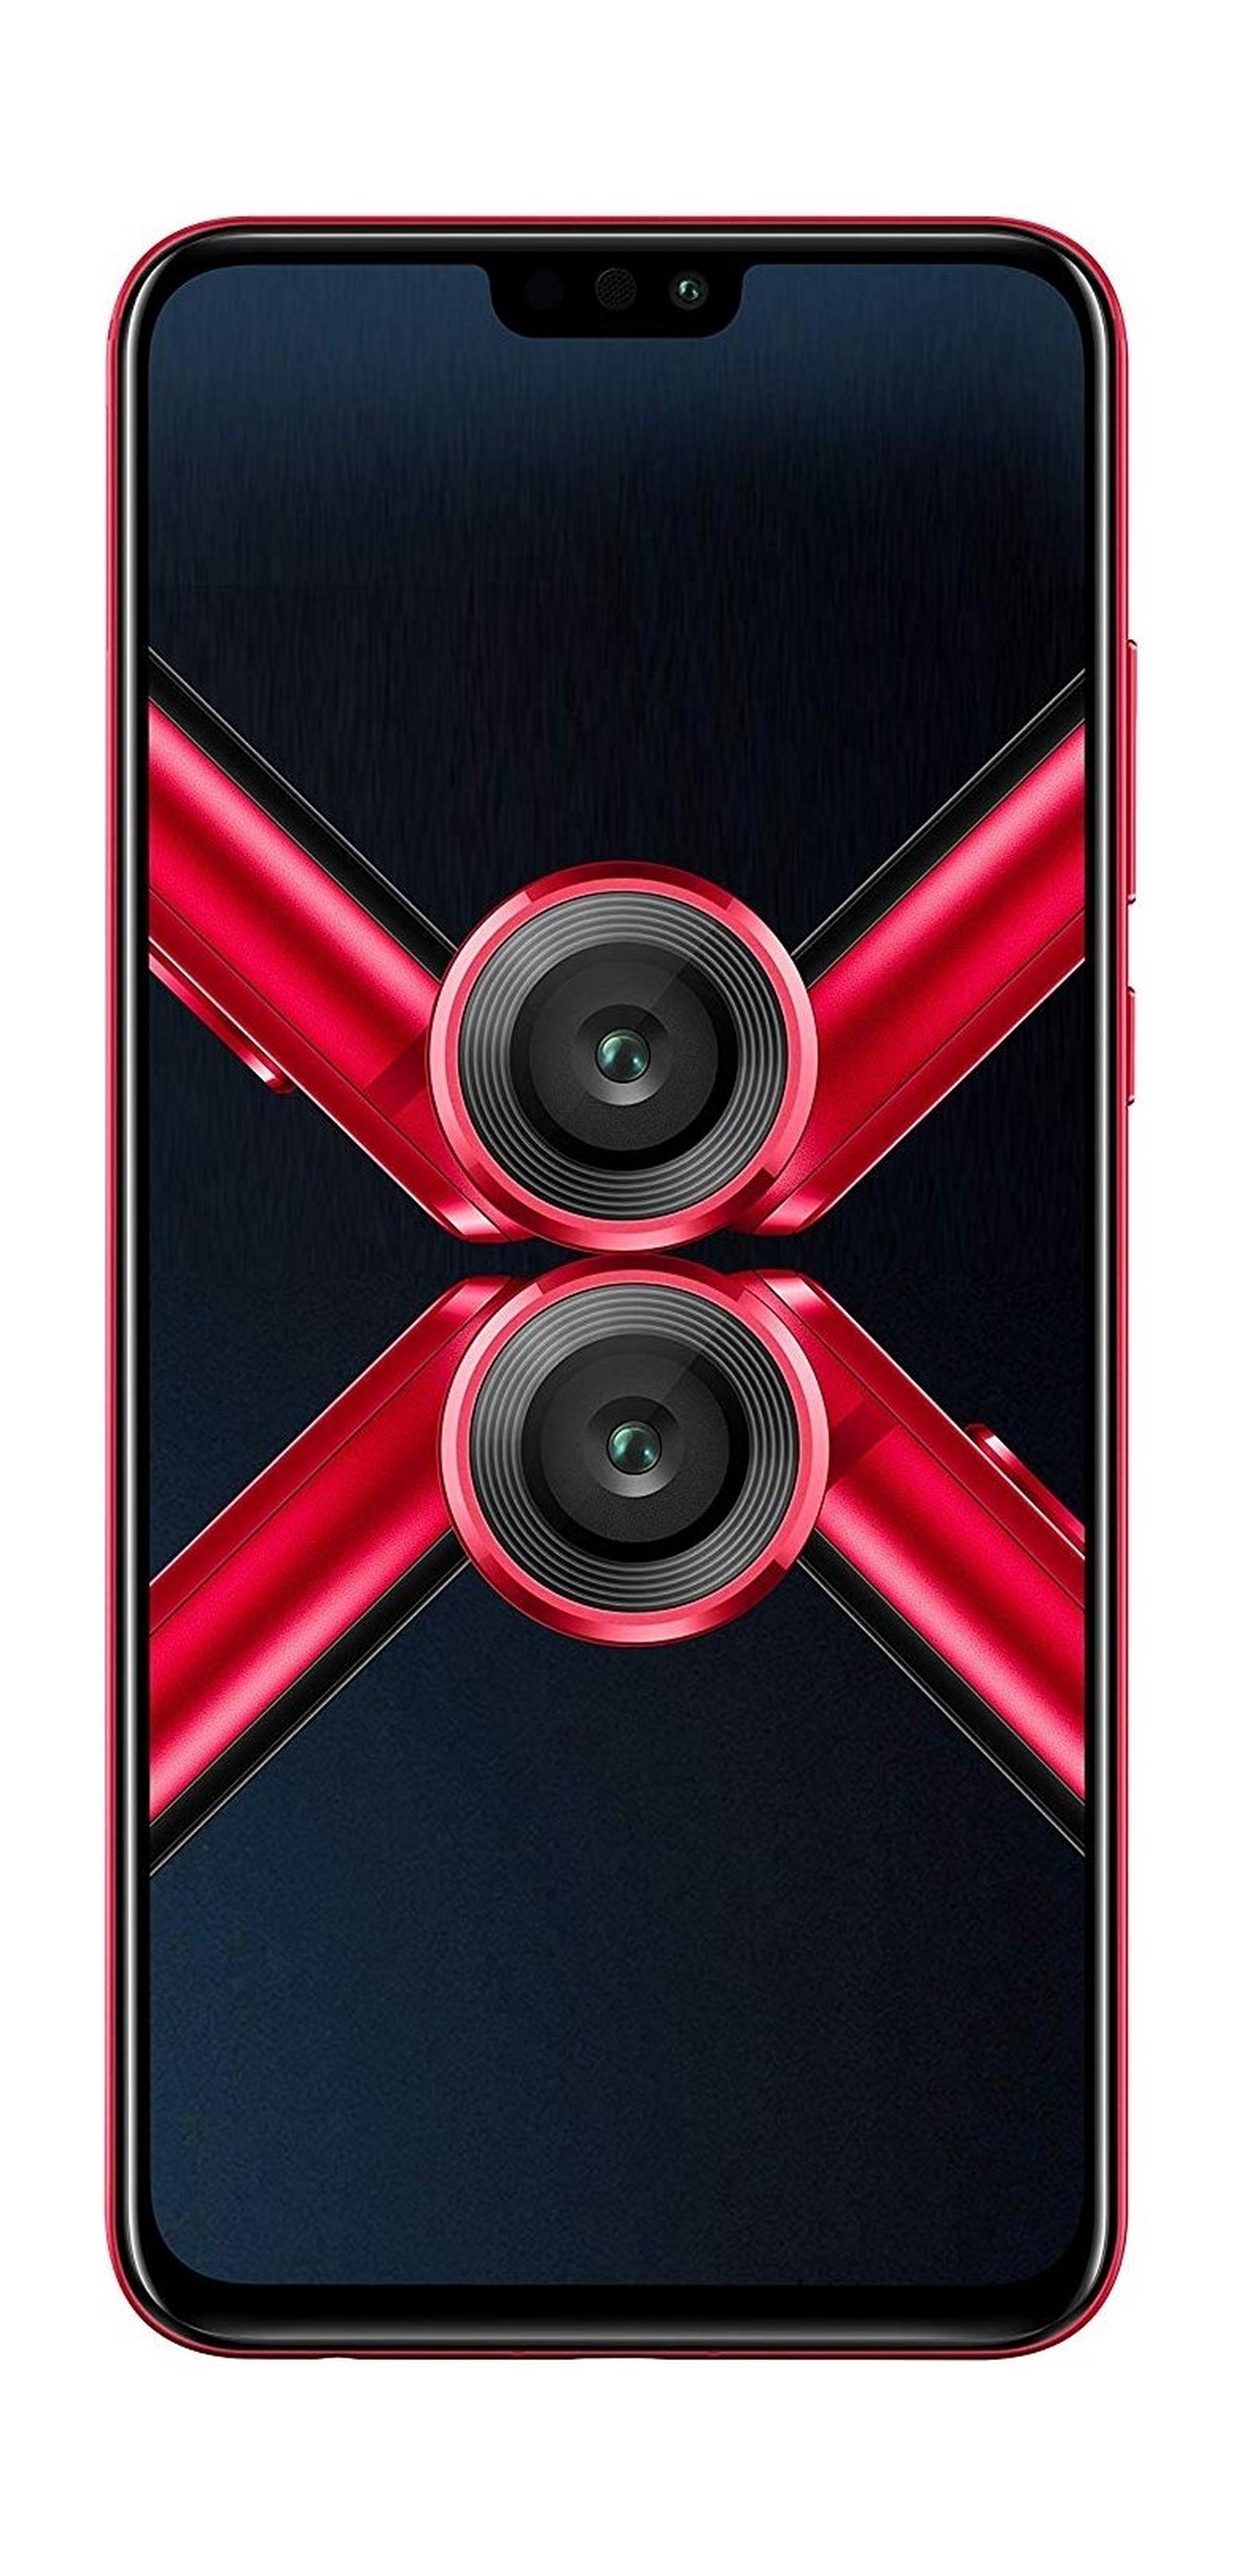 HONOR 8X 128GB Phone - Red